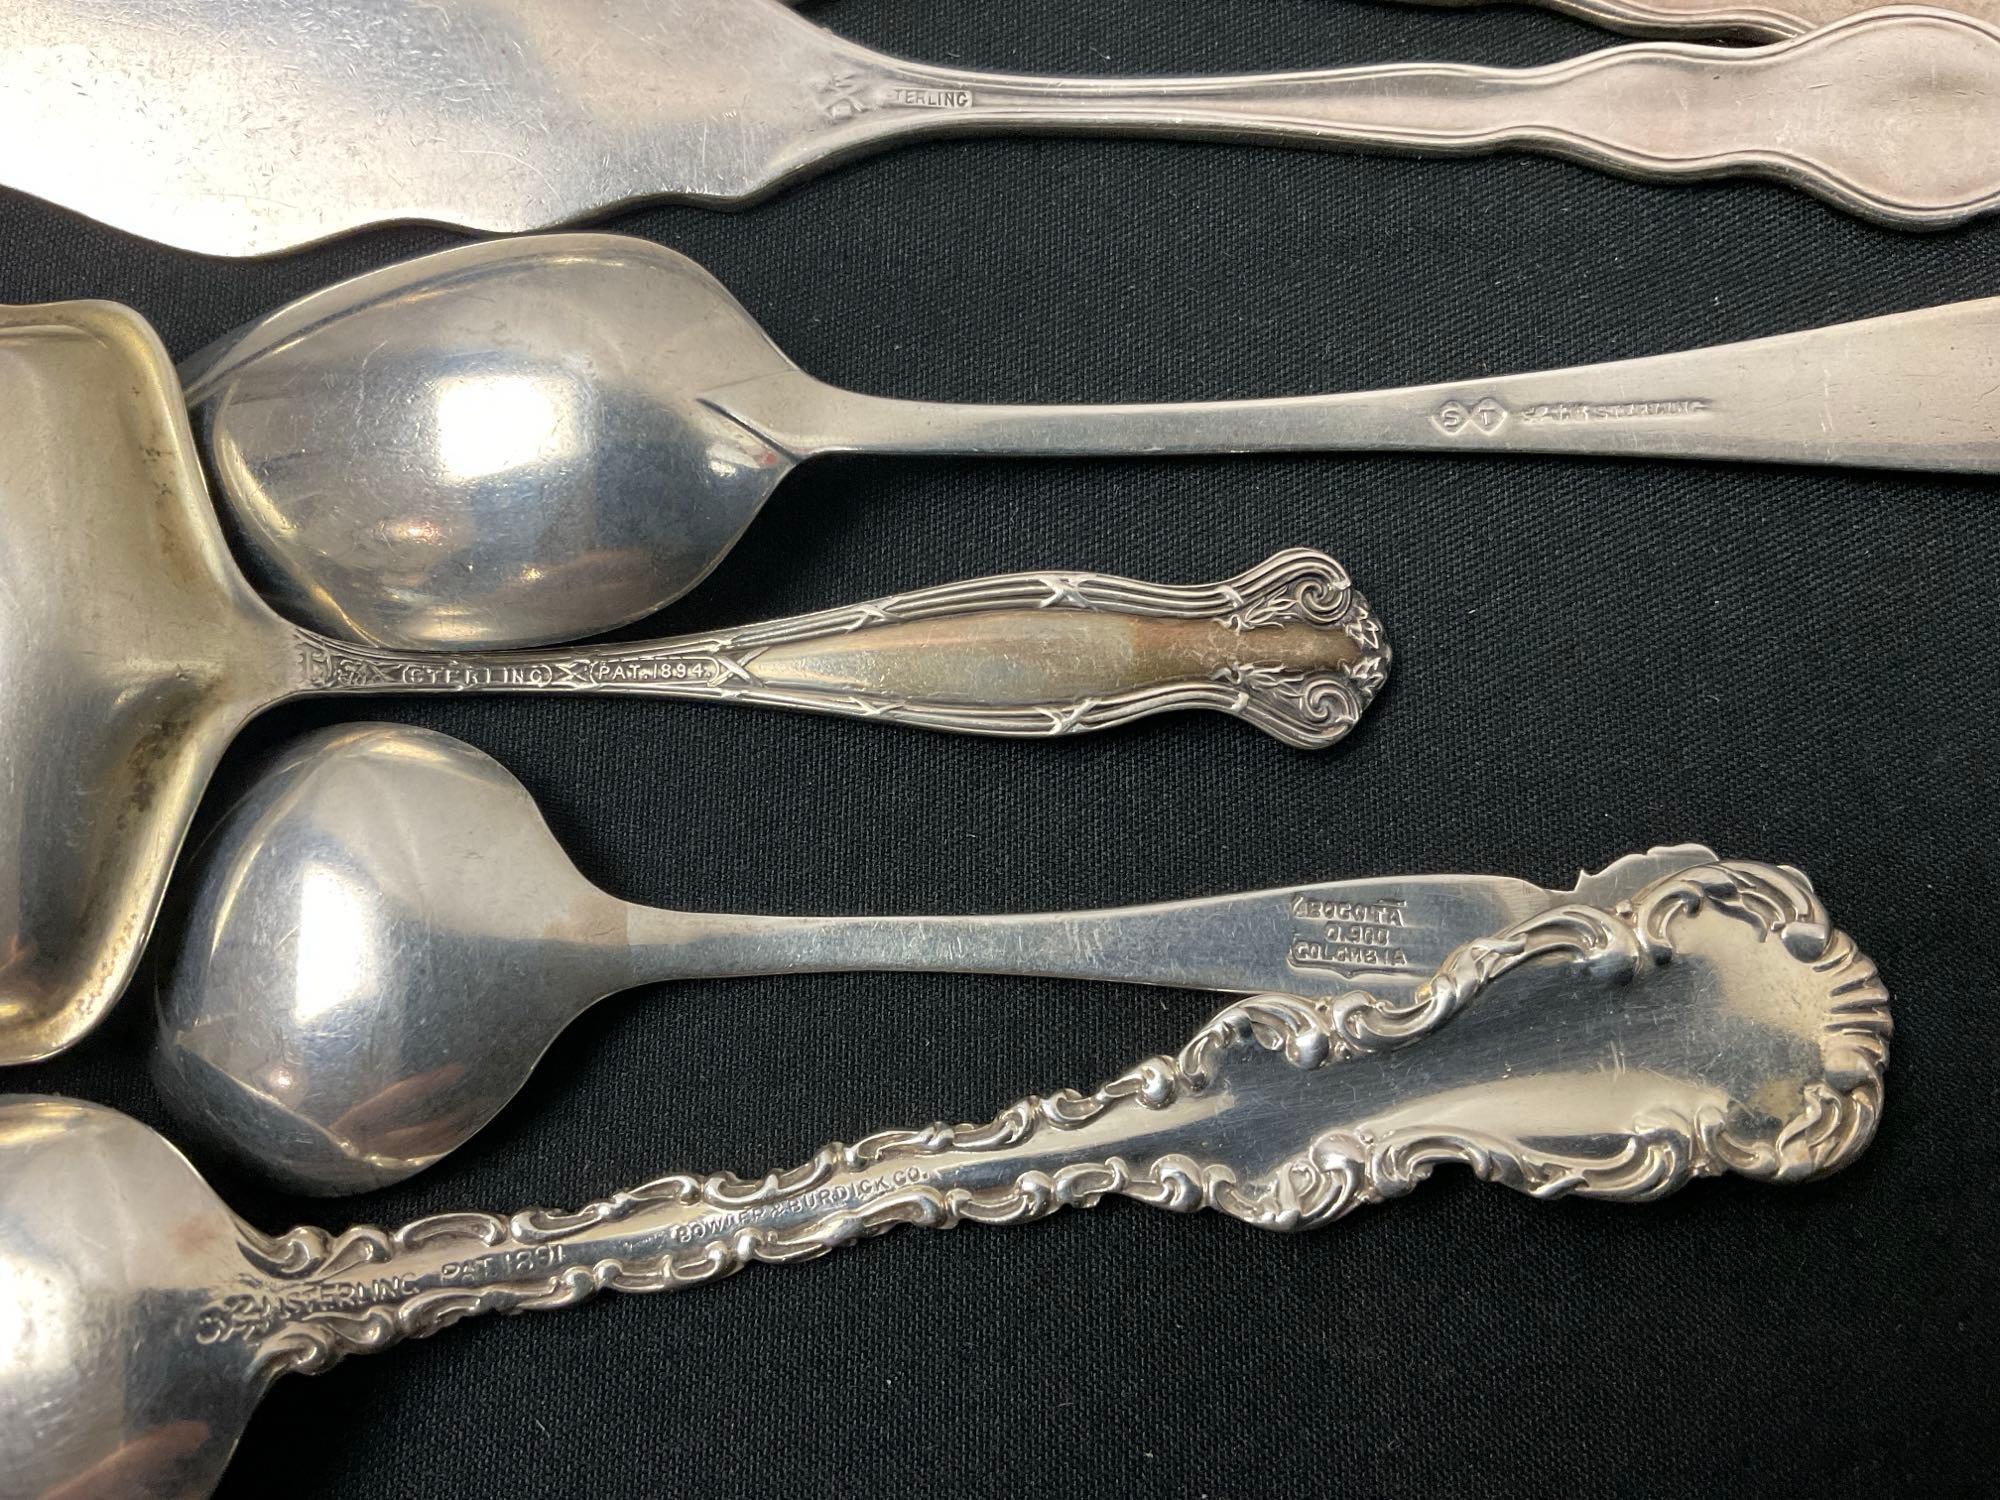 Assortment of Sterling Silver Flatware, Spoons & Butter Knives, 13 pieces